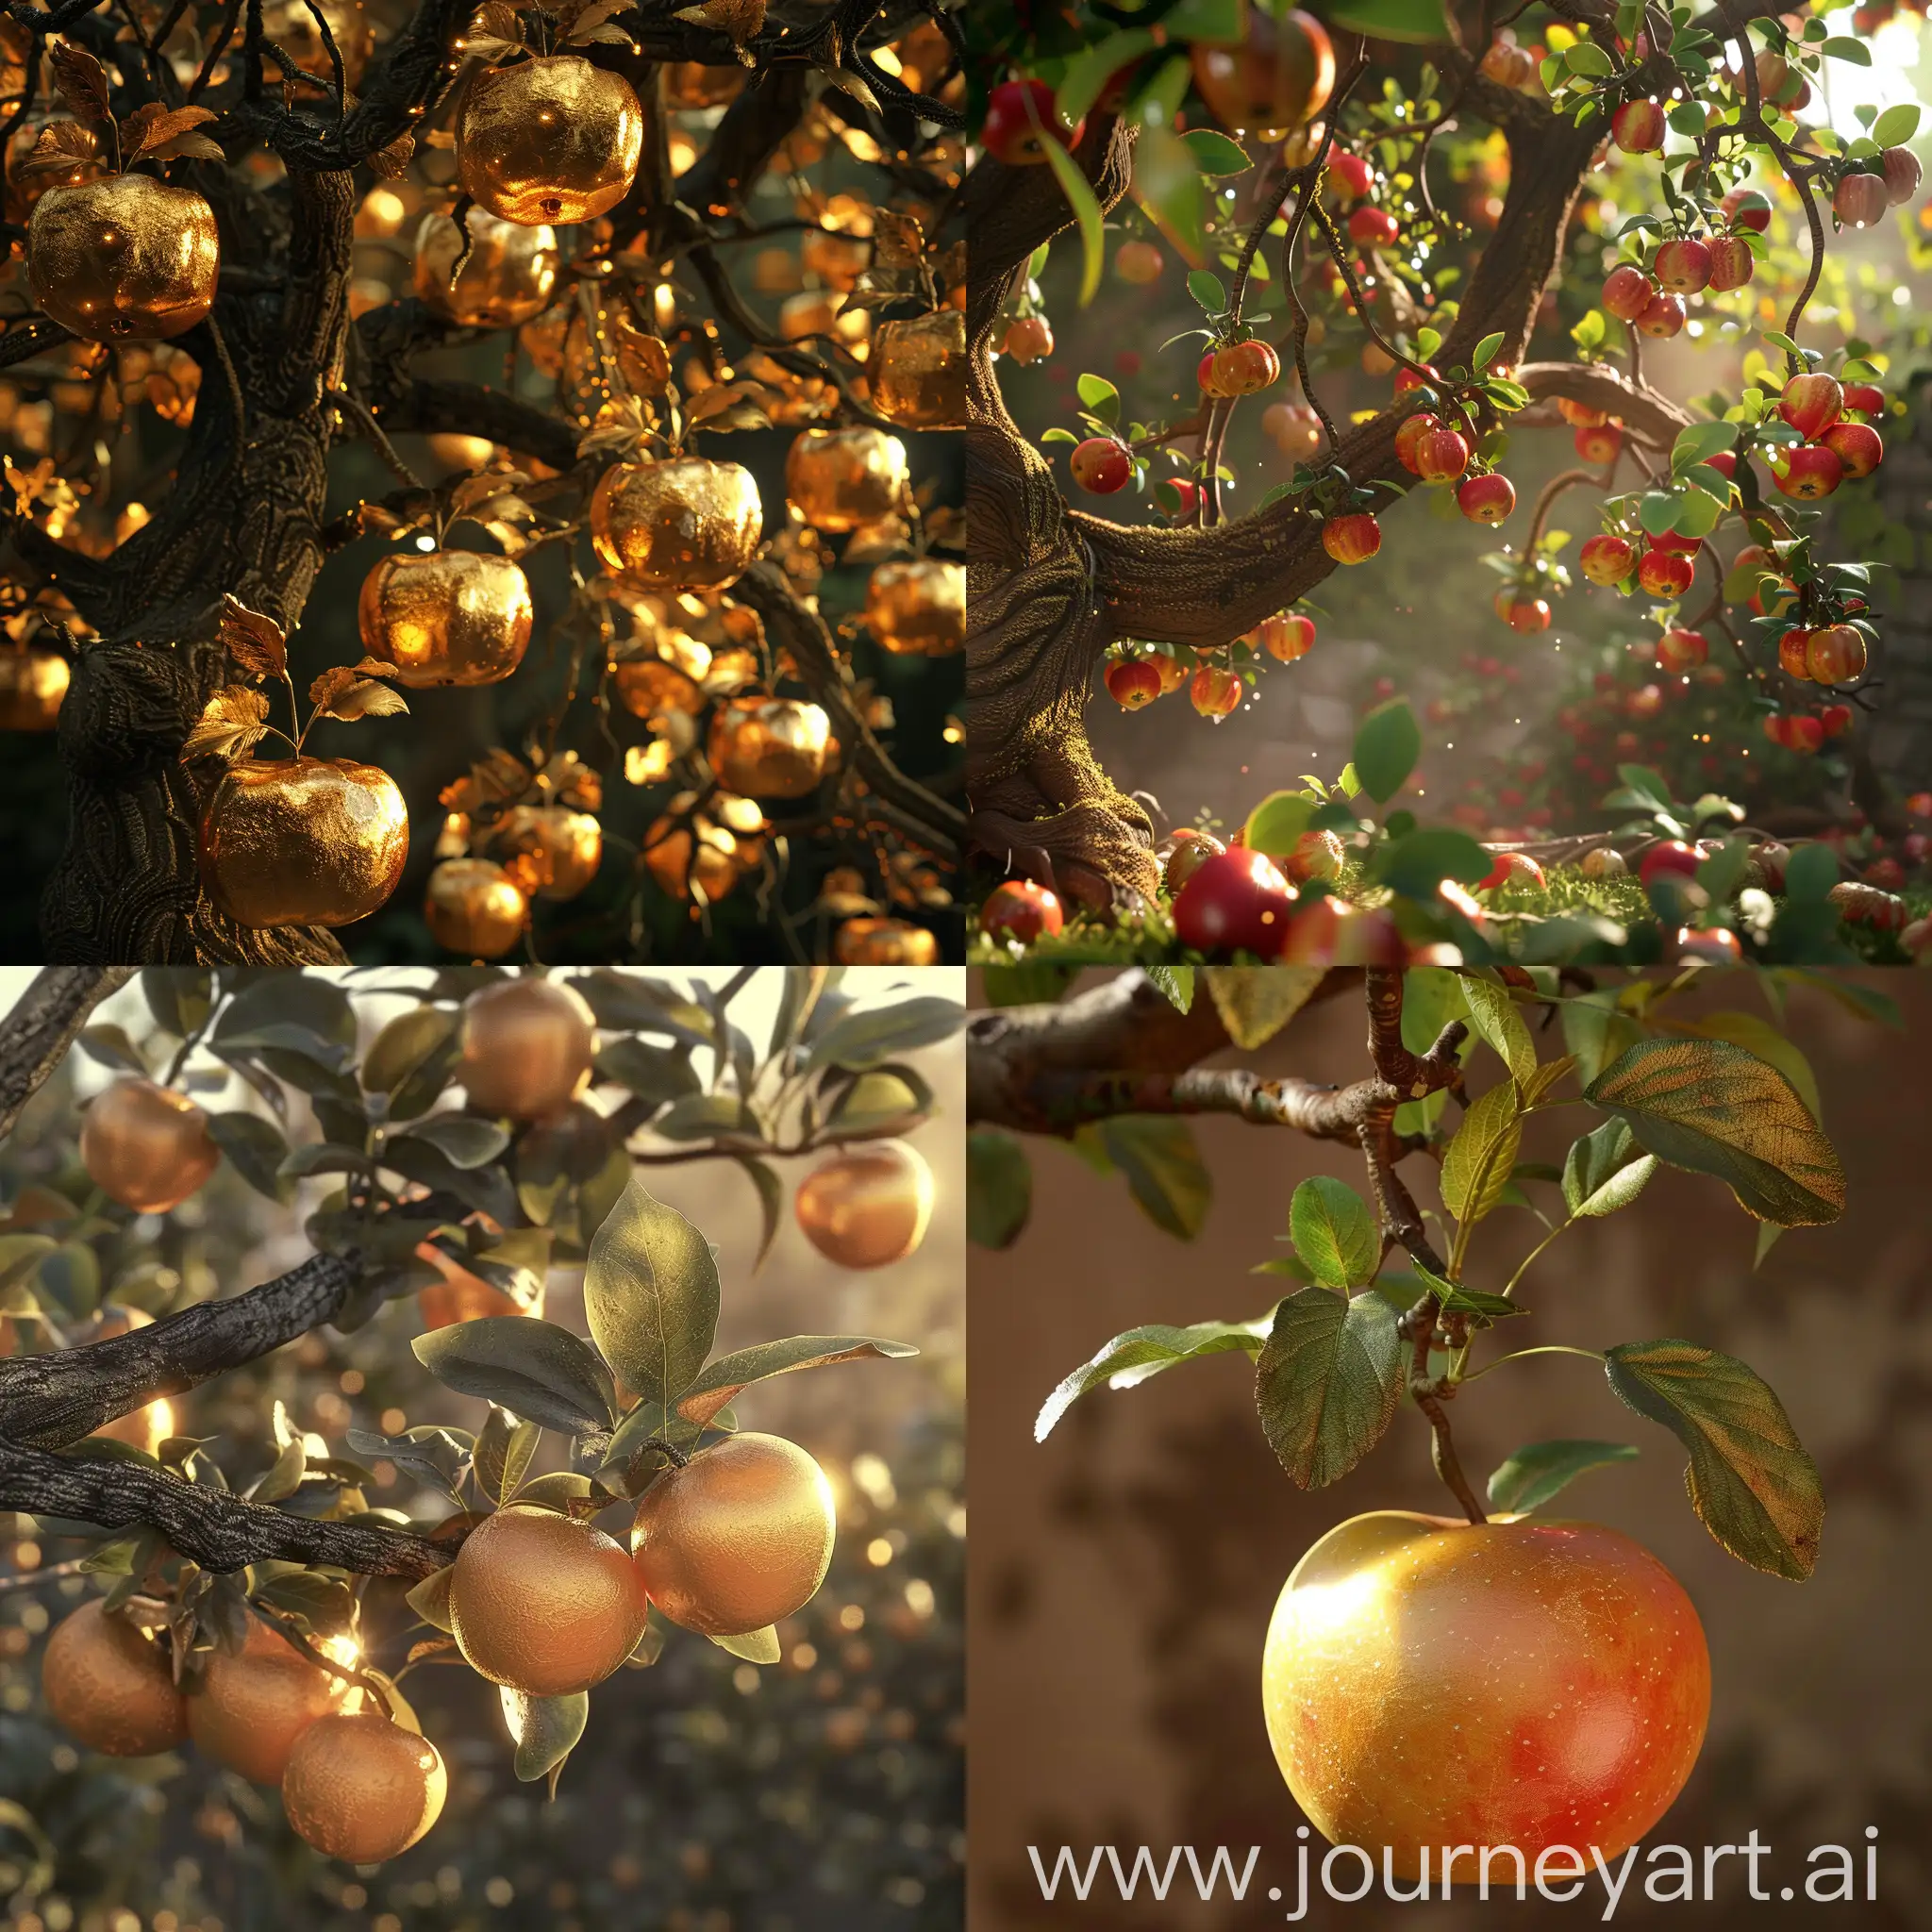 Golden apples grow on a tree :: 3D animation 